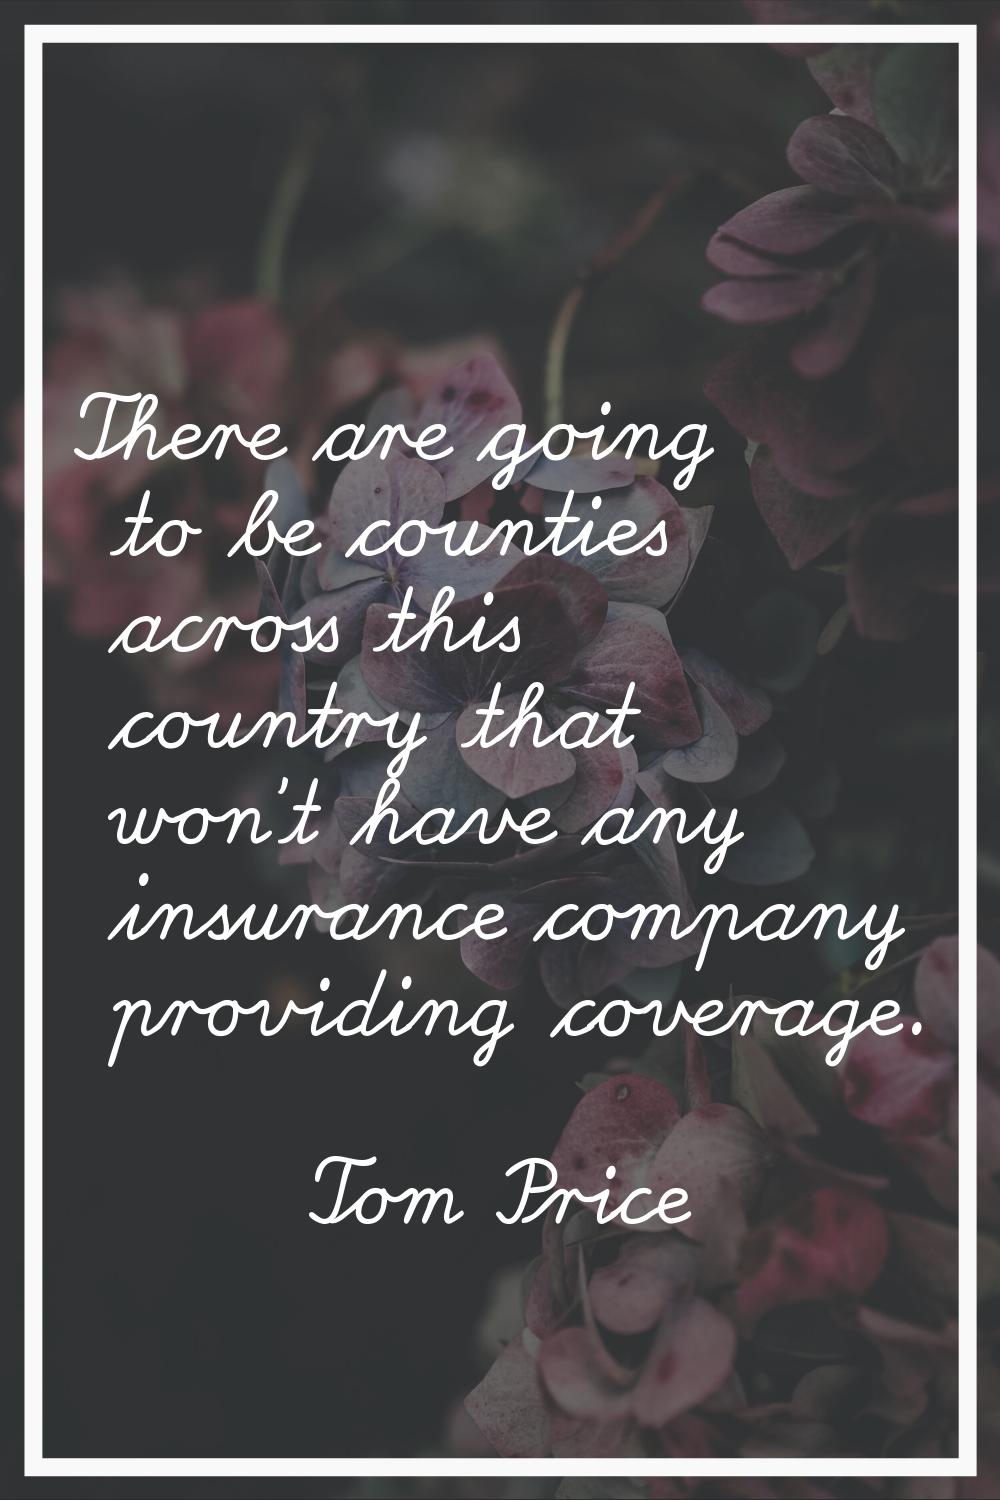 There are going to be counties across this country that won't have any insurance company providing 